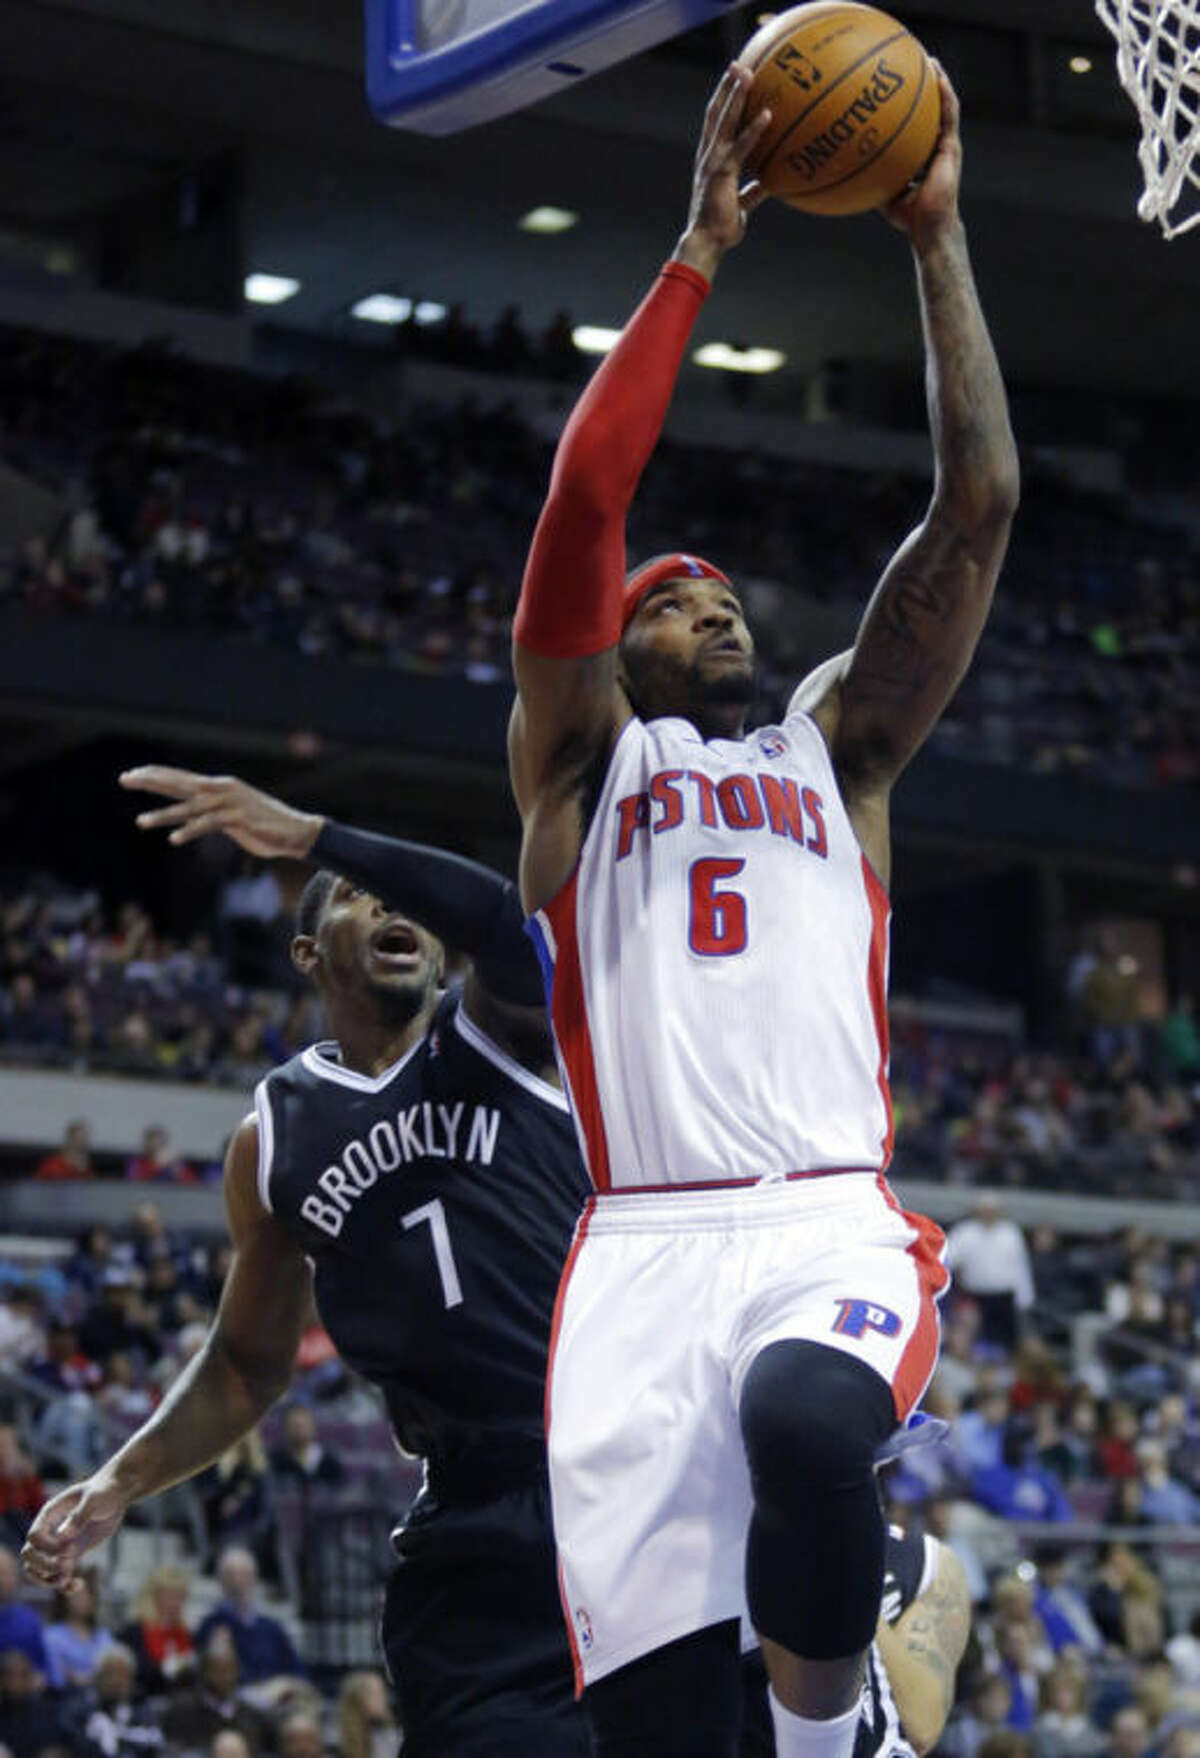 Detroit Pistons forward Josh Smith (6) gets past Brooklyn Nets guard Joe Johnson (7) for a dunk during the first half of an NBA basketball game on Friday, Feb. 7, 2014, in Auburn Hills, Mich. (AP Photo/Duane Burleson)